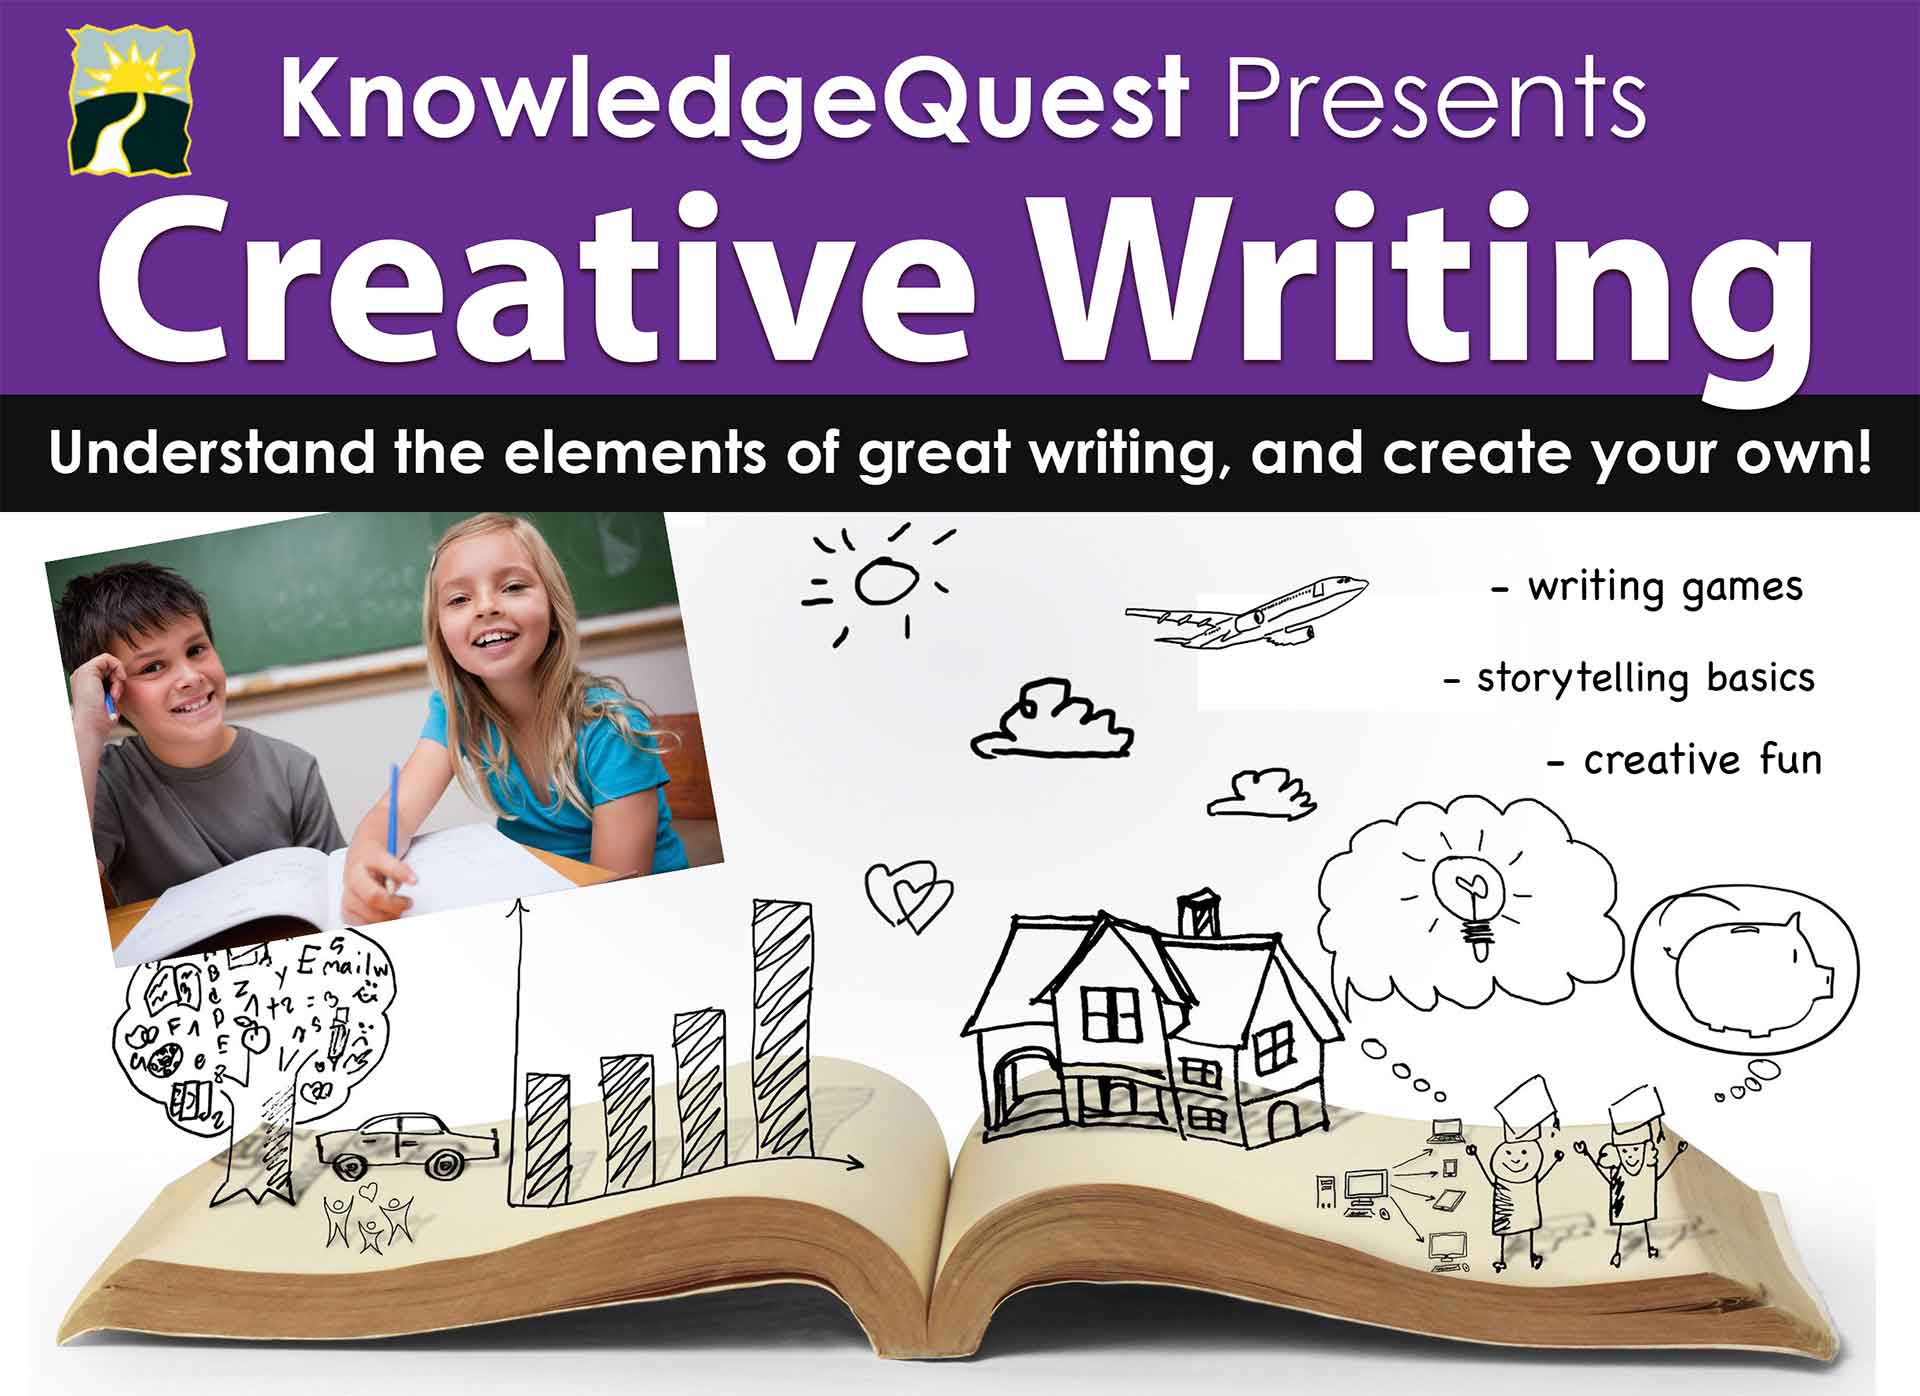 KnowledgeQuest Presents Creative Writing